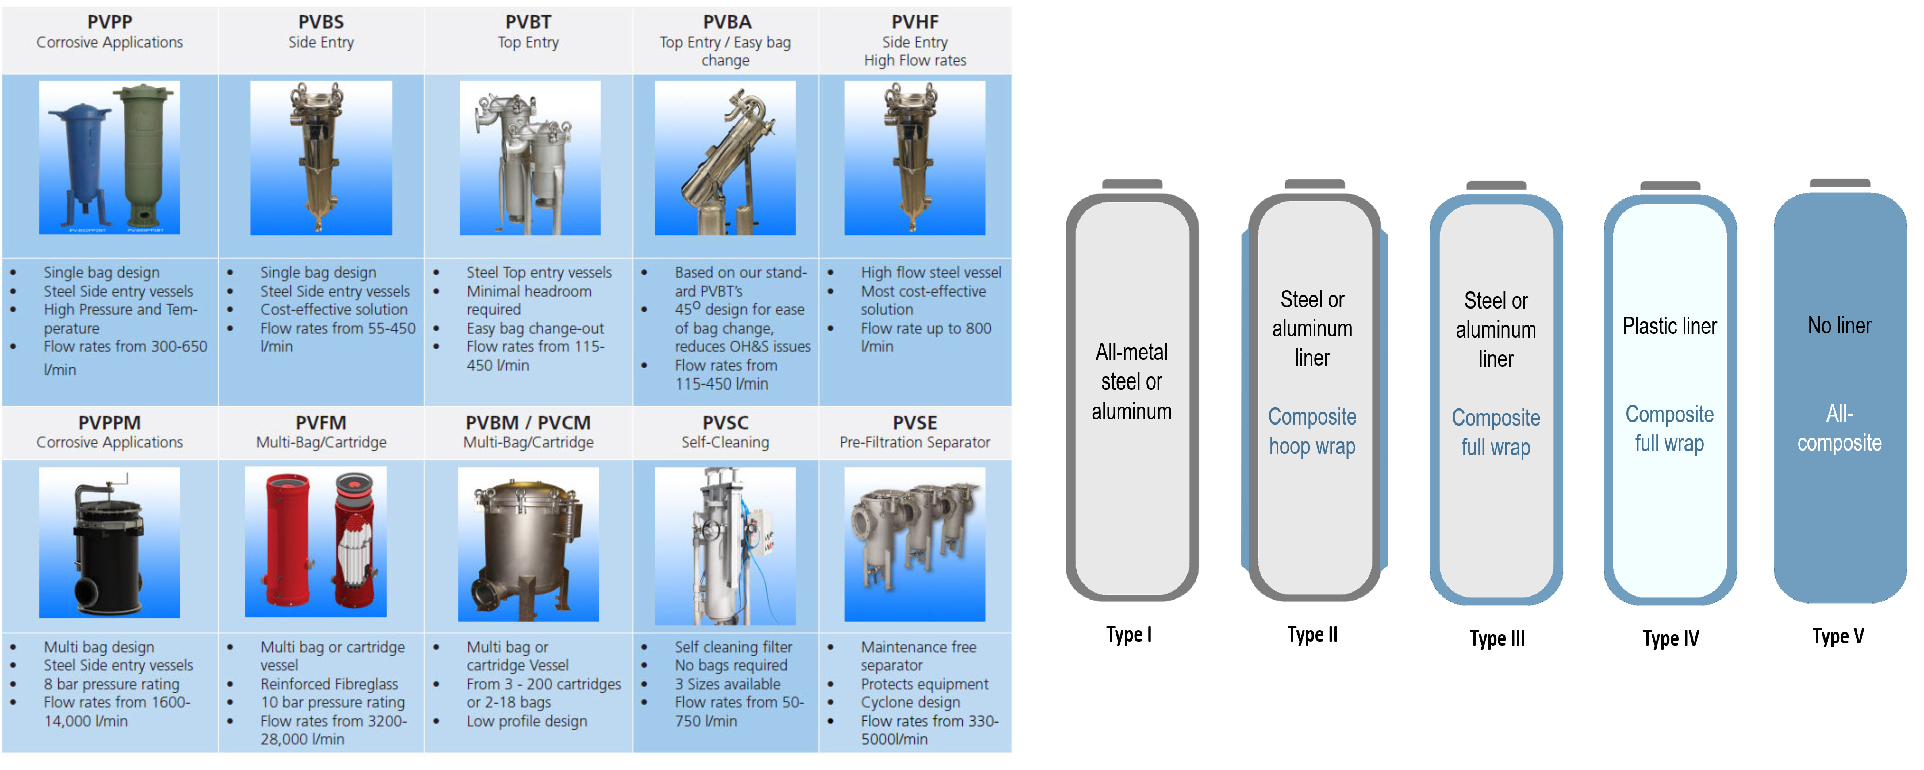 Types of Vessel in Oil and Gas